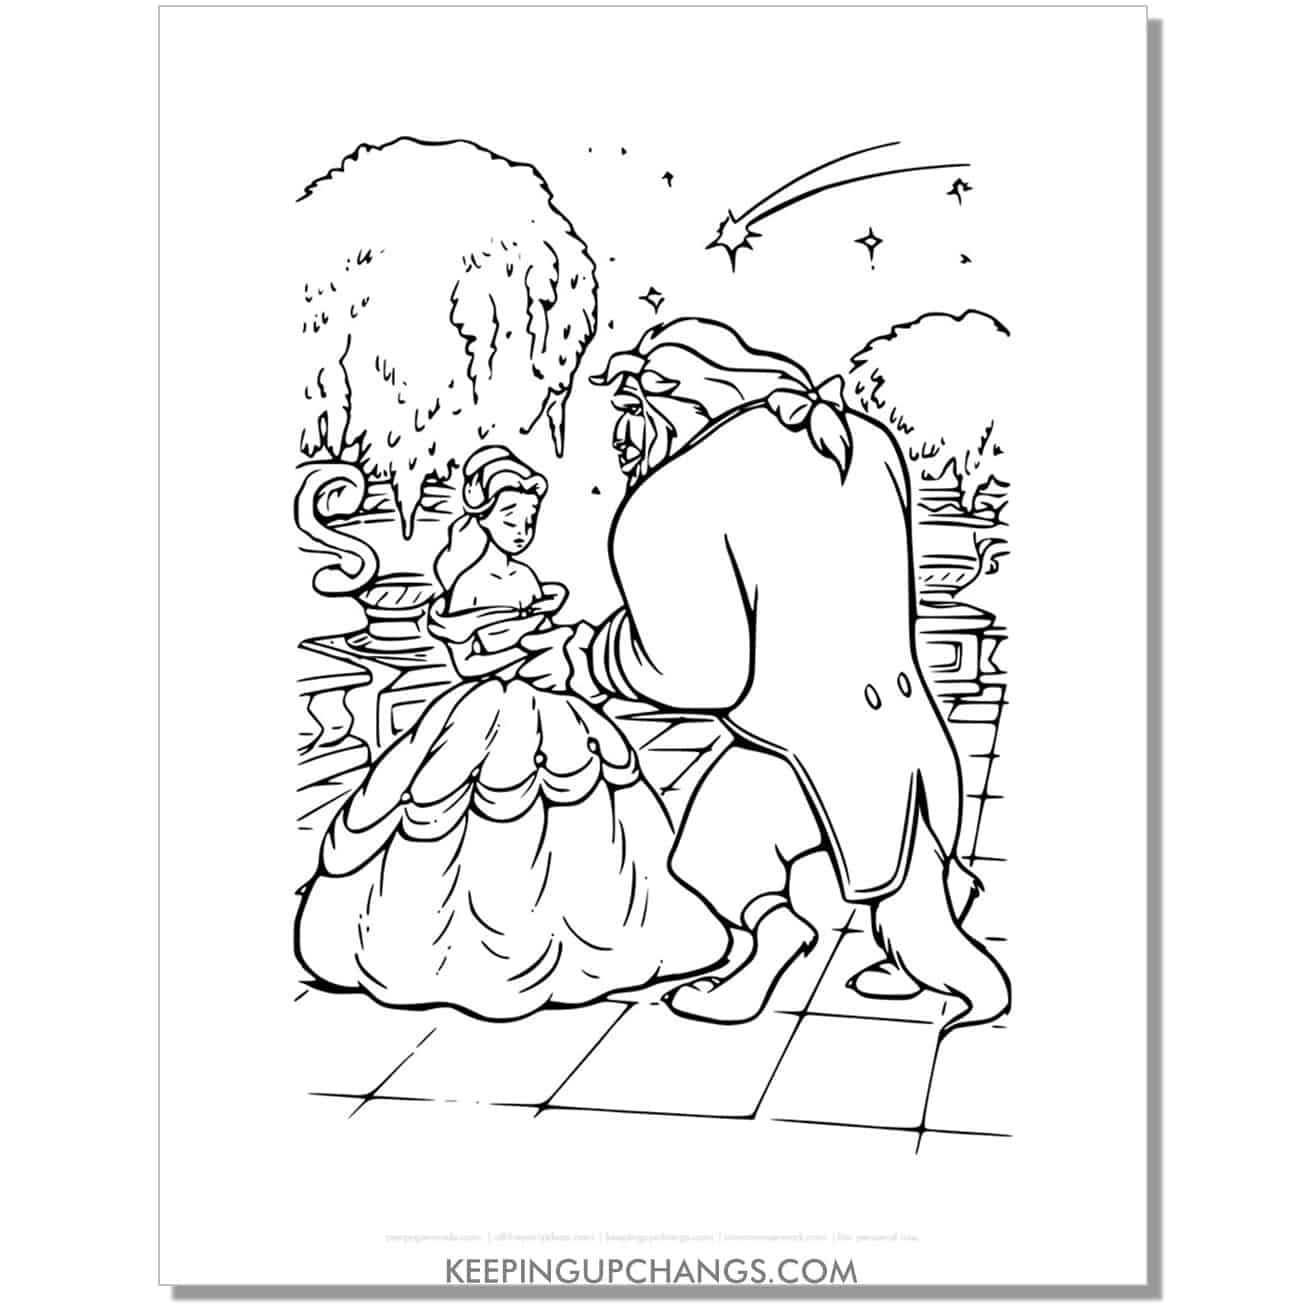 beauty and beast in garden coloring page, sheet.